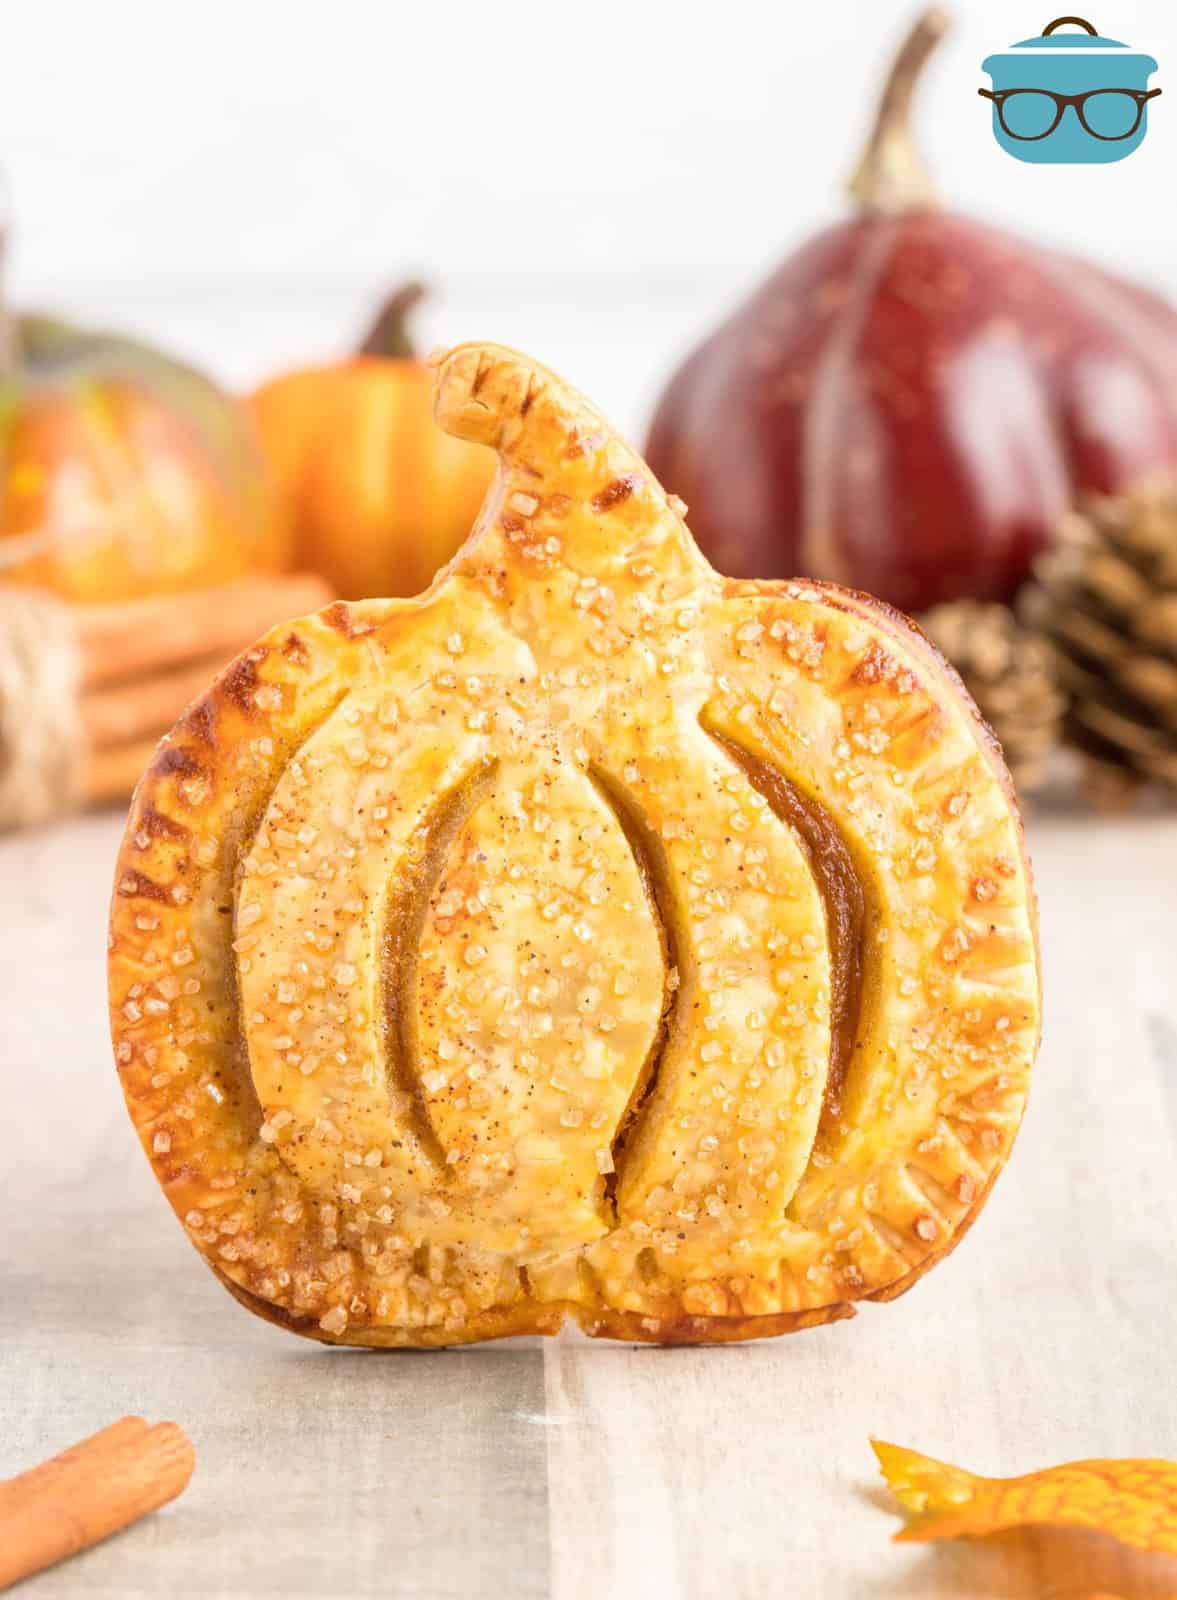 One of the Pumpkin Hand Pies propped up showing the pumpkin shape.